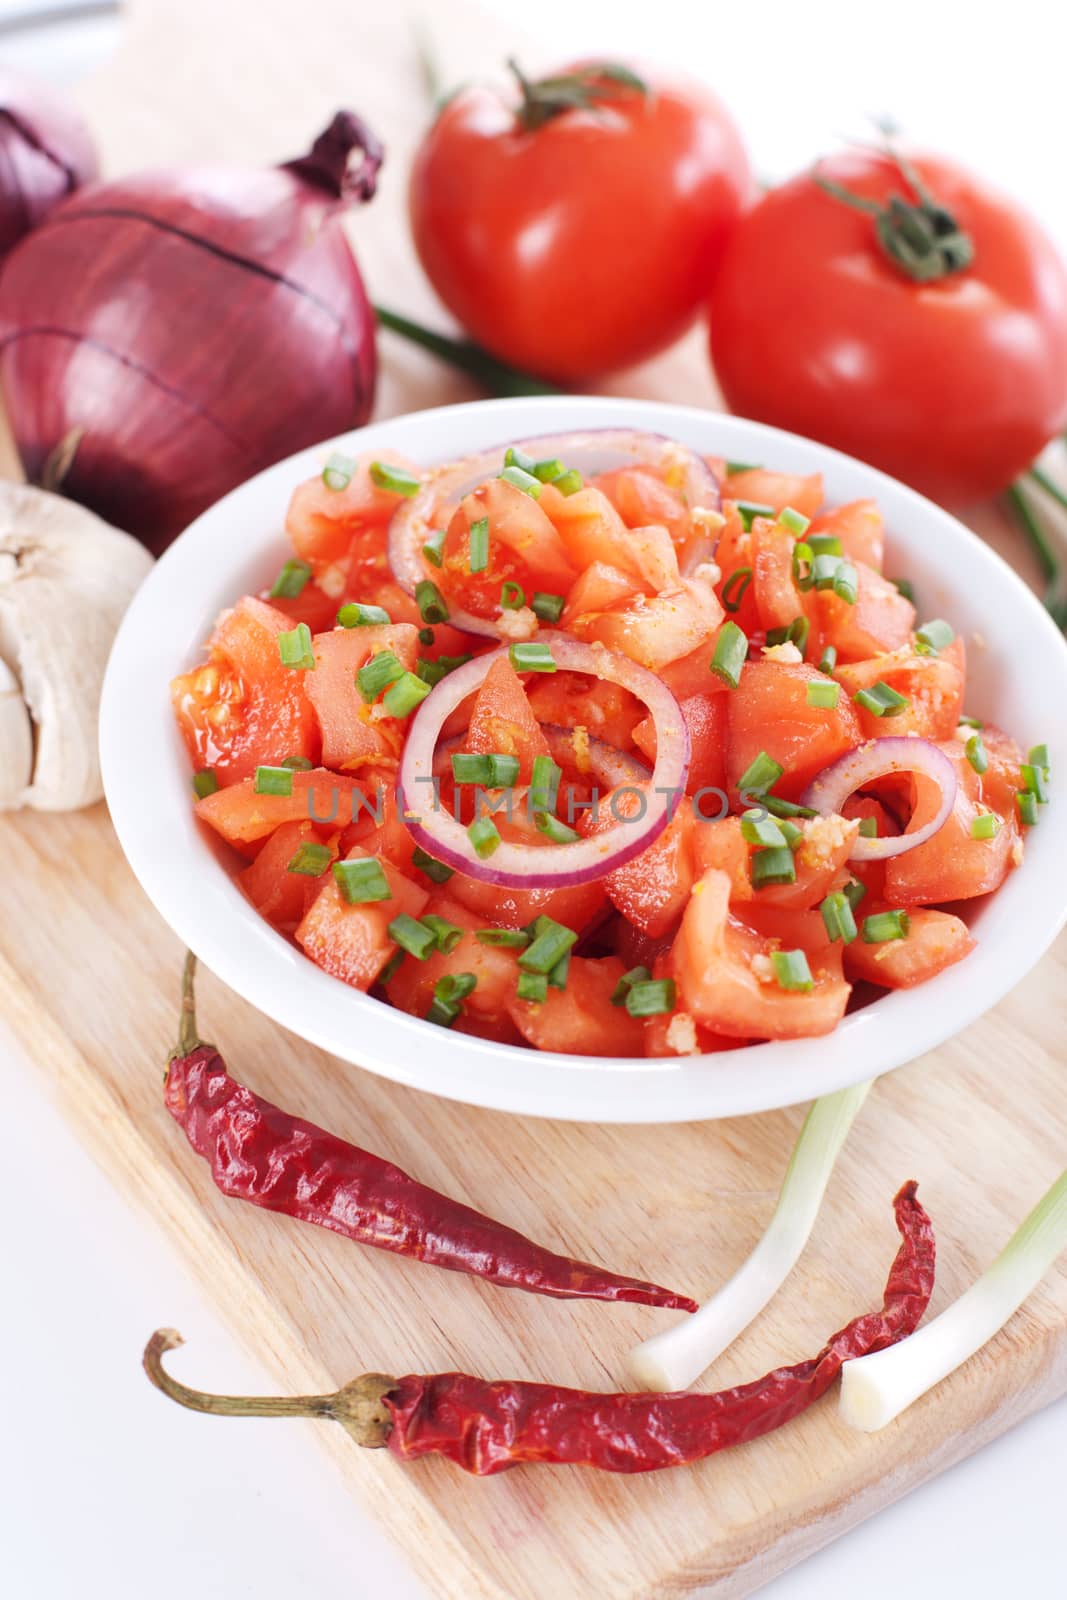 Salsa in a bowl on a wooden board and the ingredients: tomatoes, onions, garlic, chili pepper